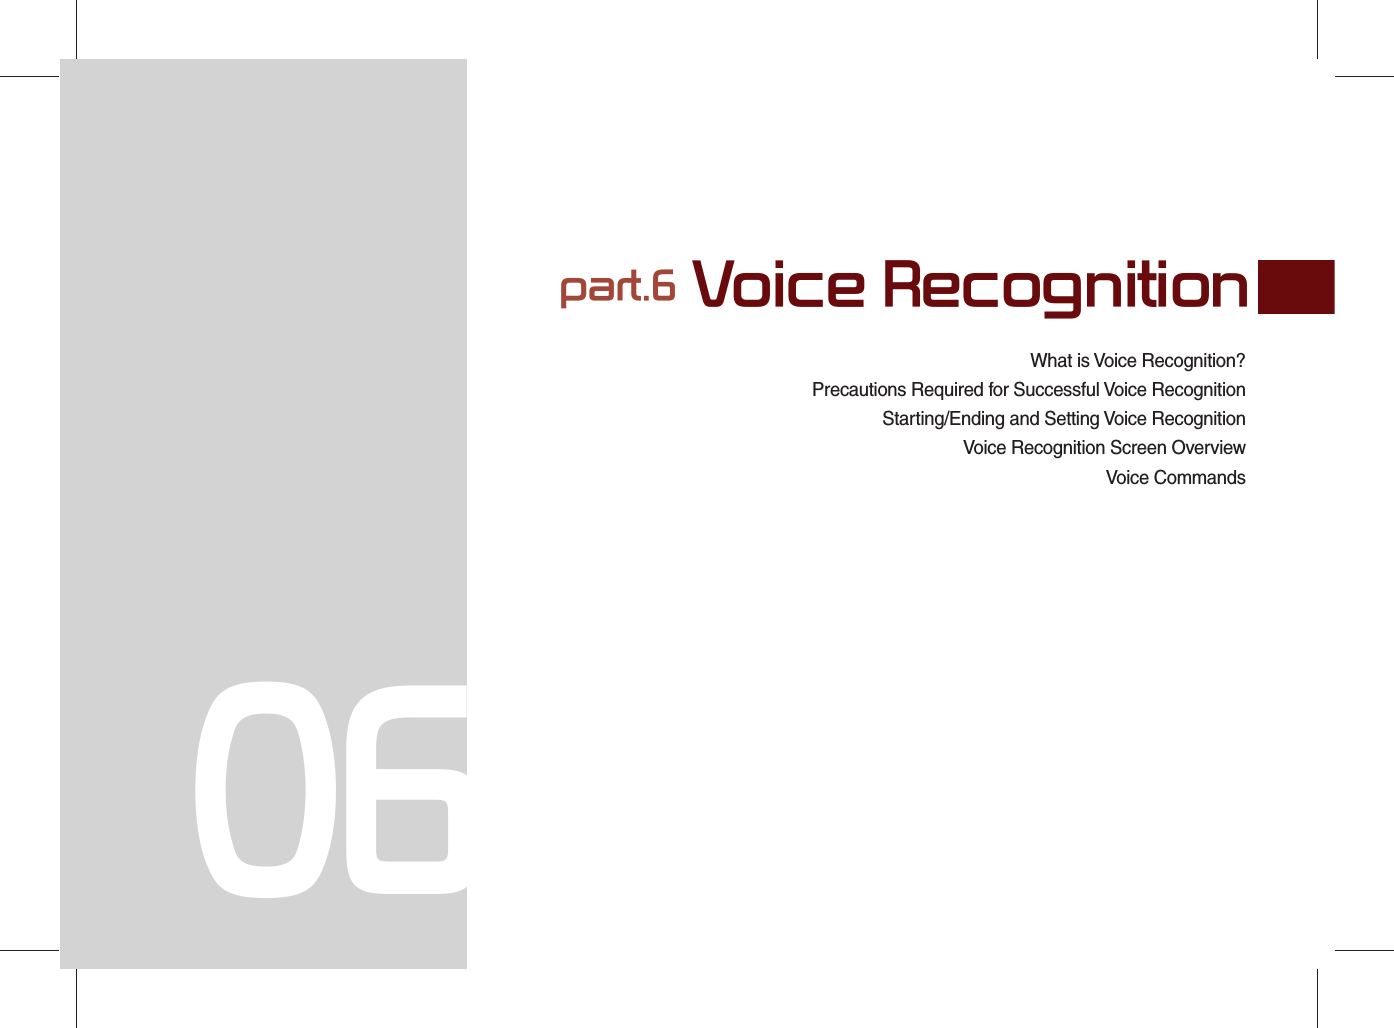 What is Voice Recognition?Precautions Required for Successful Voice RecognitionStarting/Ending and Setting Voice Recognition  Voice Recognition Screen OverviewVoice Commands part.6 Voice Recognition06